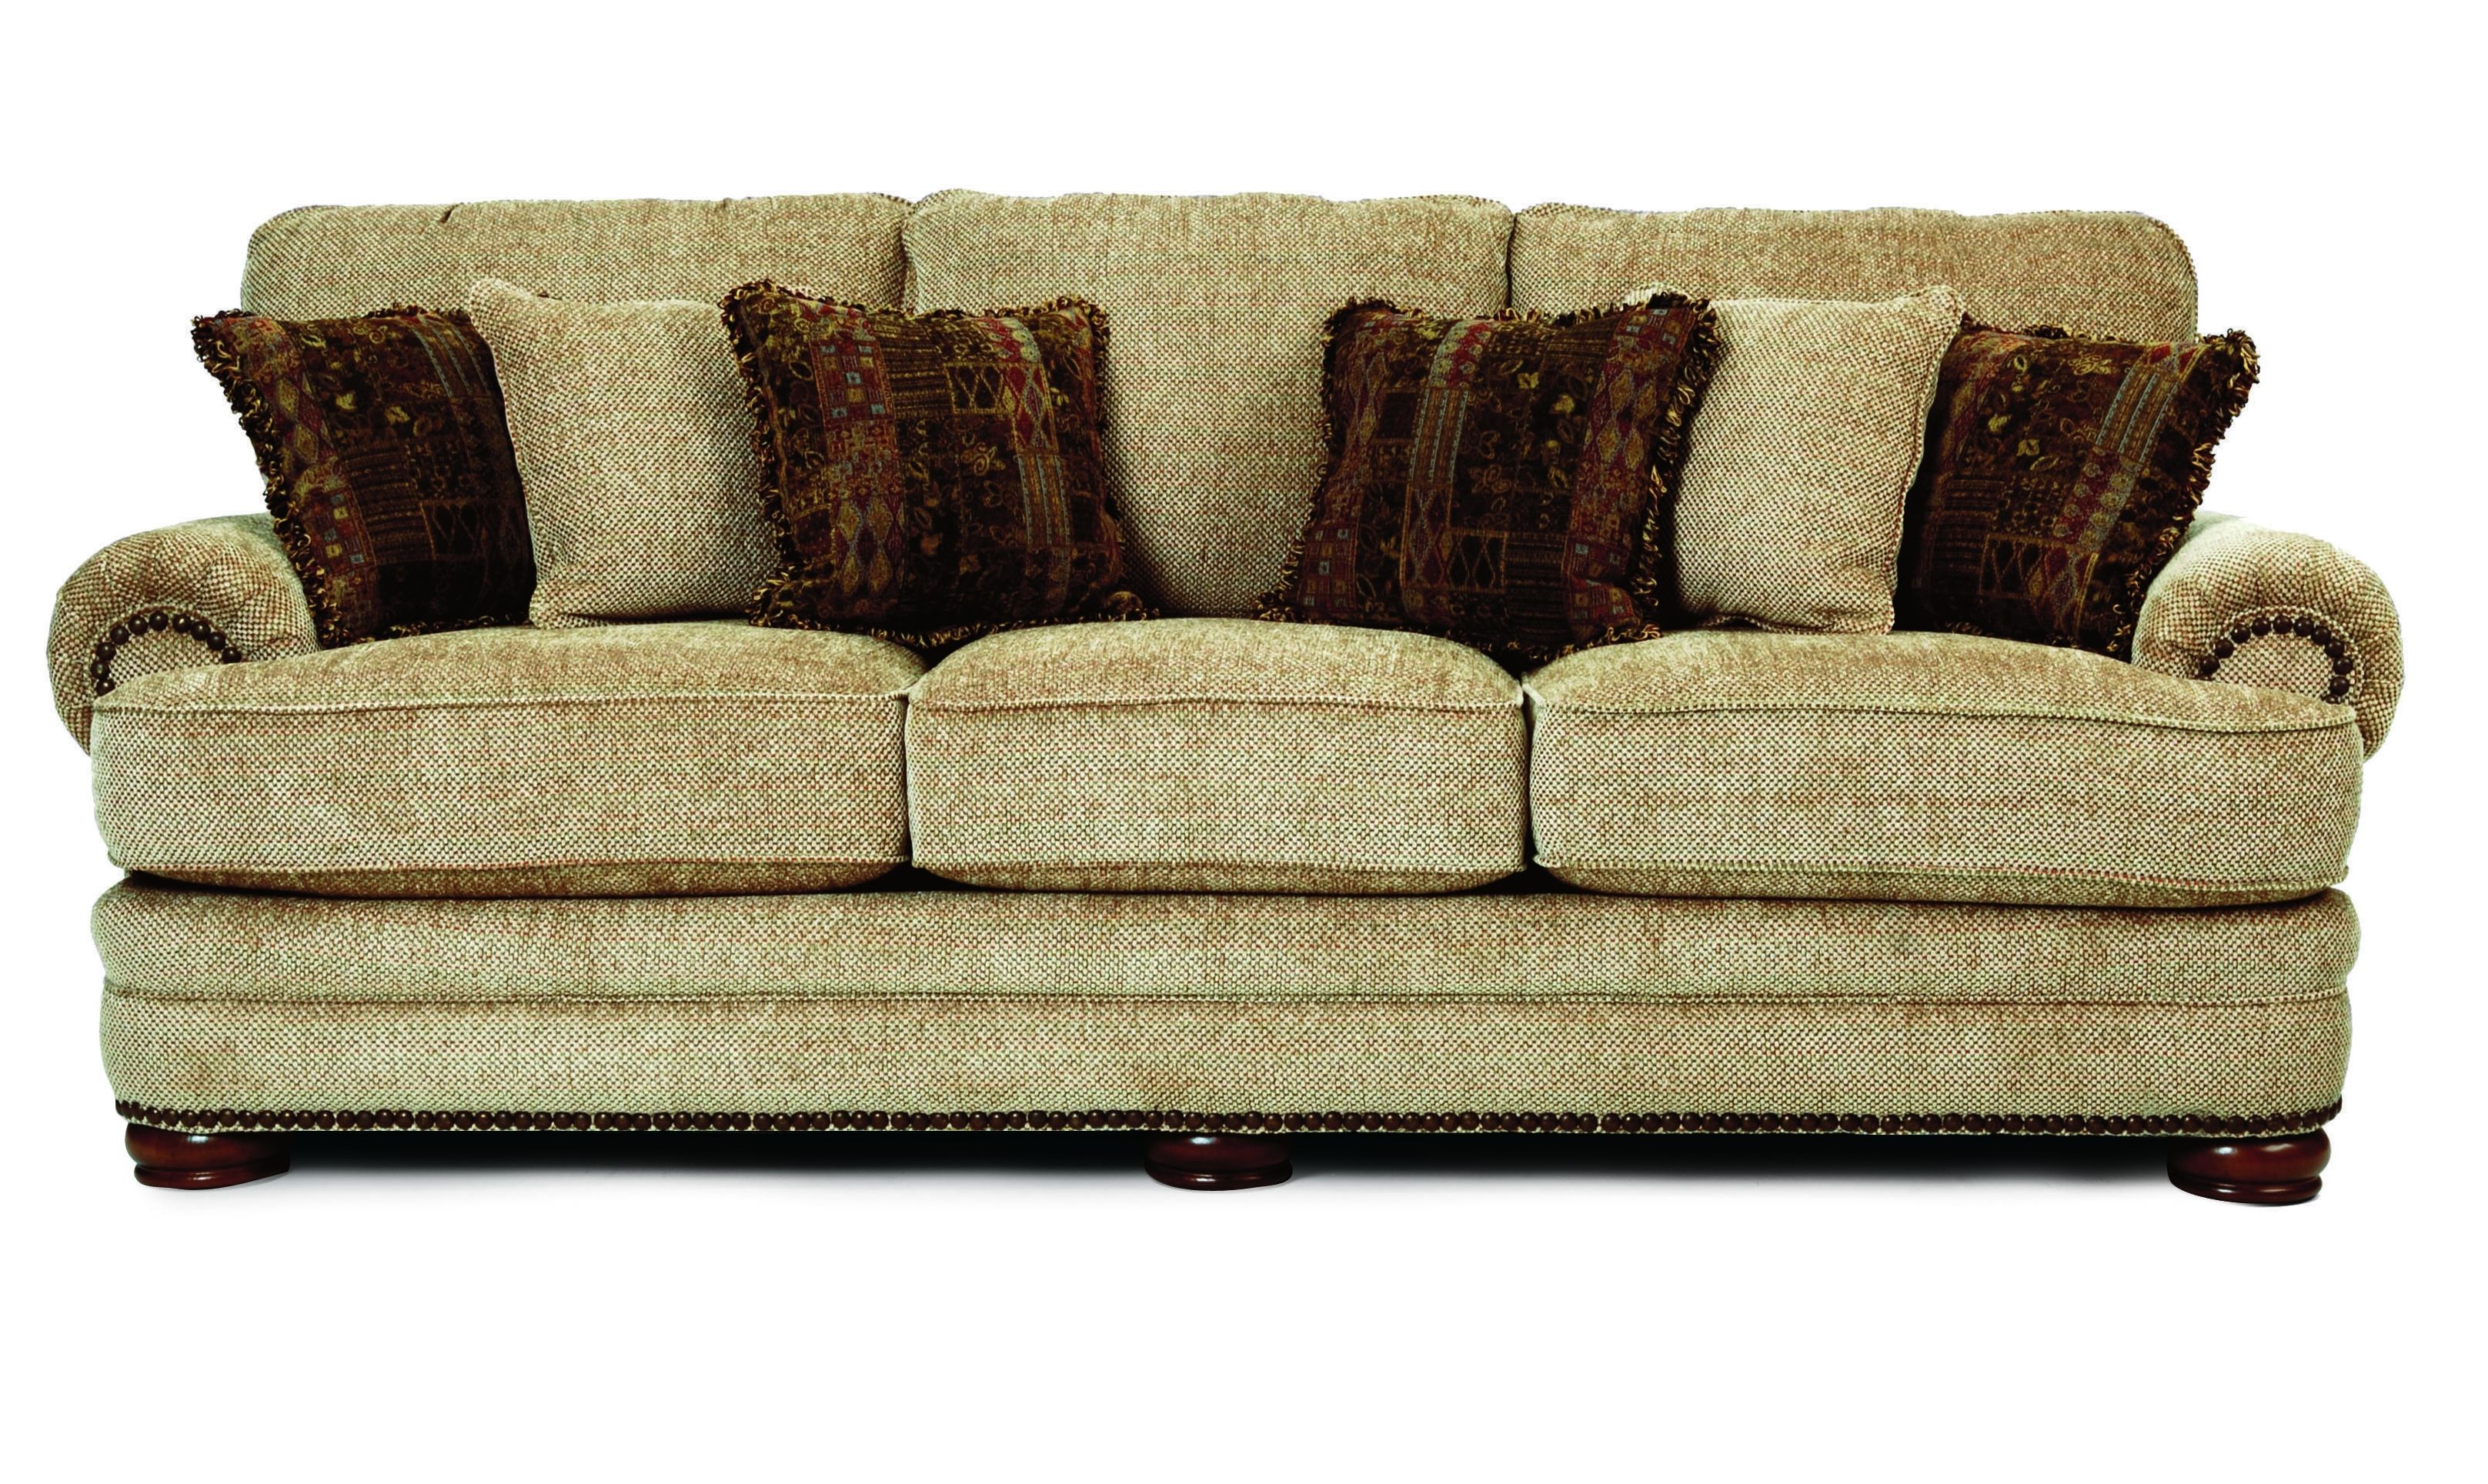 Stanton Stationary Sofa – Lane 86330, 863 30 Throughout Most Up To Date Lane Furniture Sofas (View 1 of 20)